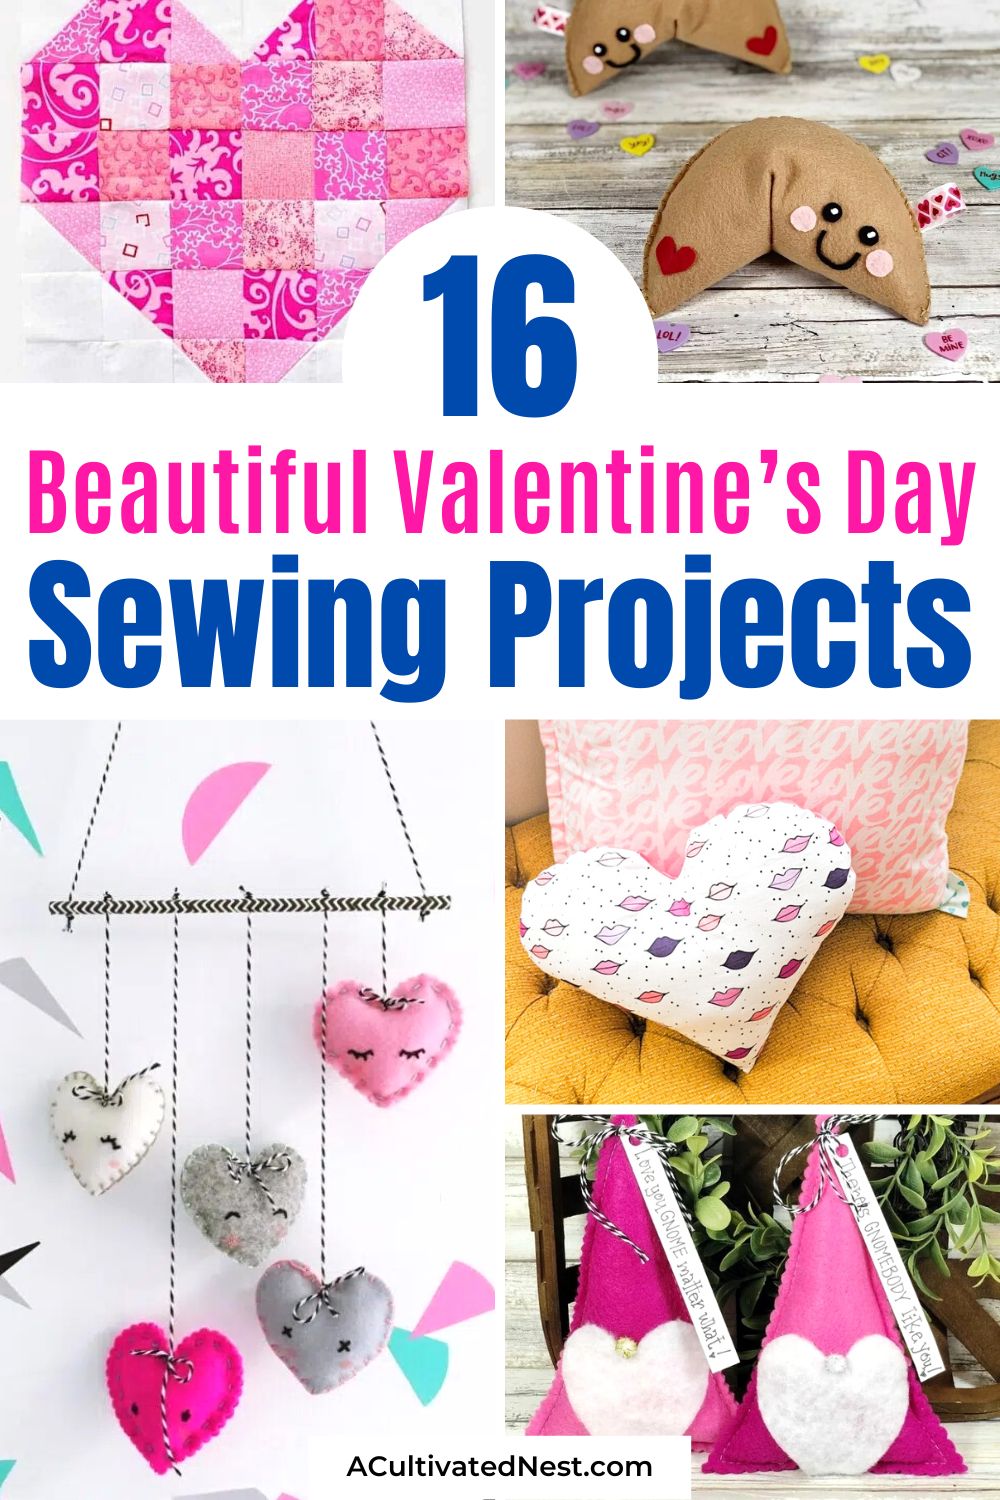 16 Beautiful DIY Valentine's Day Sewing Projects- Stitch your way to a memorable Valentine's Day with these beautiful DIY sewing projects. Create delightful crafts and decorations that capture the spirit of love. Perfect for adding a handmade touch to your celebration! | #ValentinesDIY #sewingProjects #ValentinesDay #crafts #ACultivatedNest